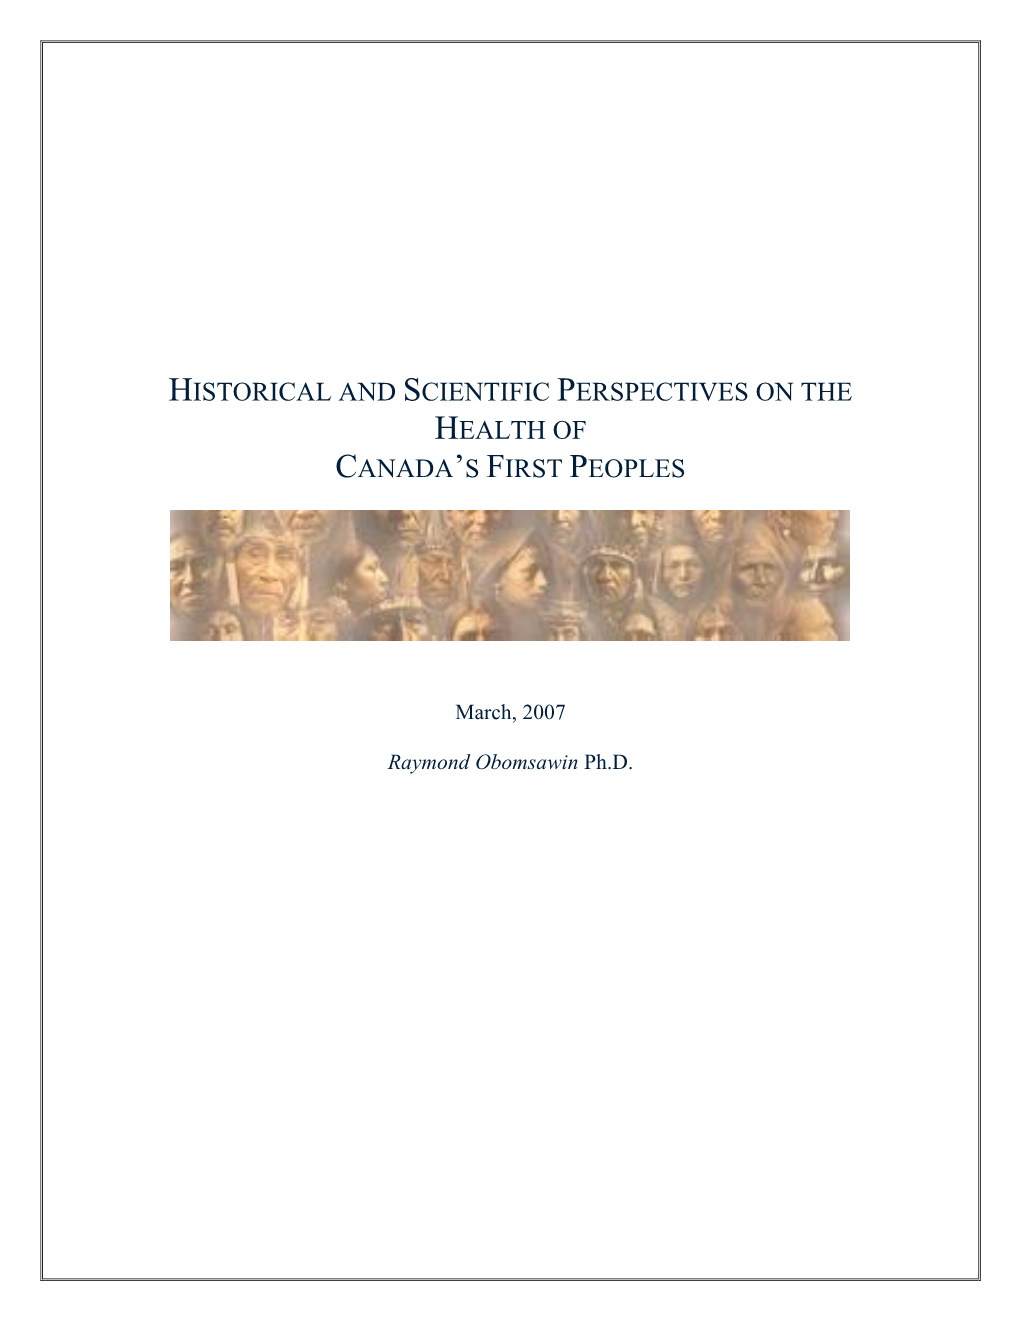 Historical and Scientific Perspectives on the Health of Canada's First